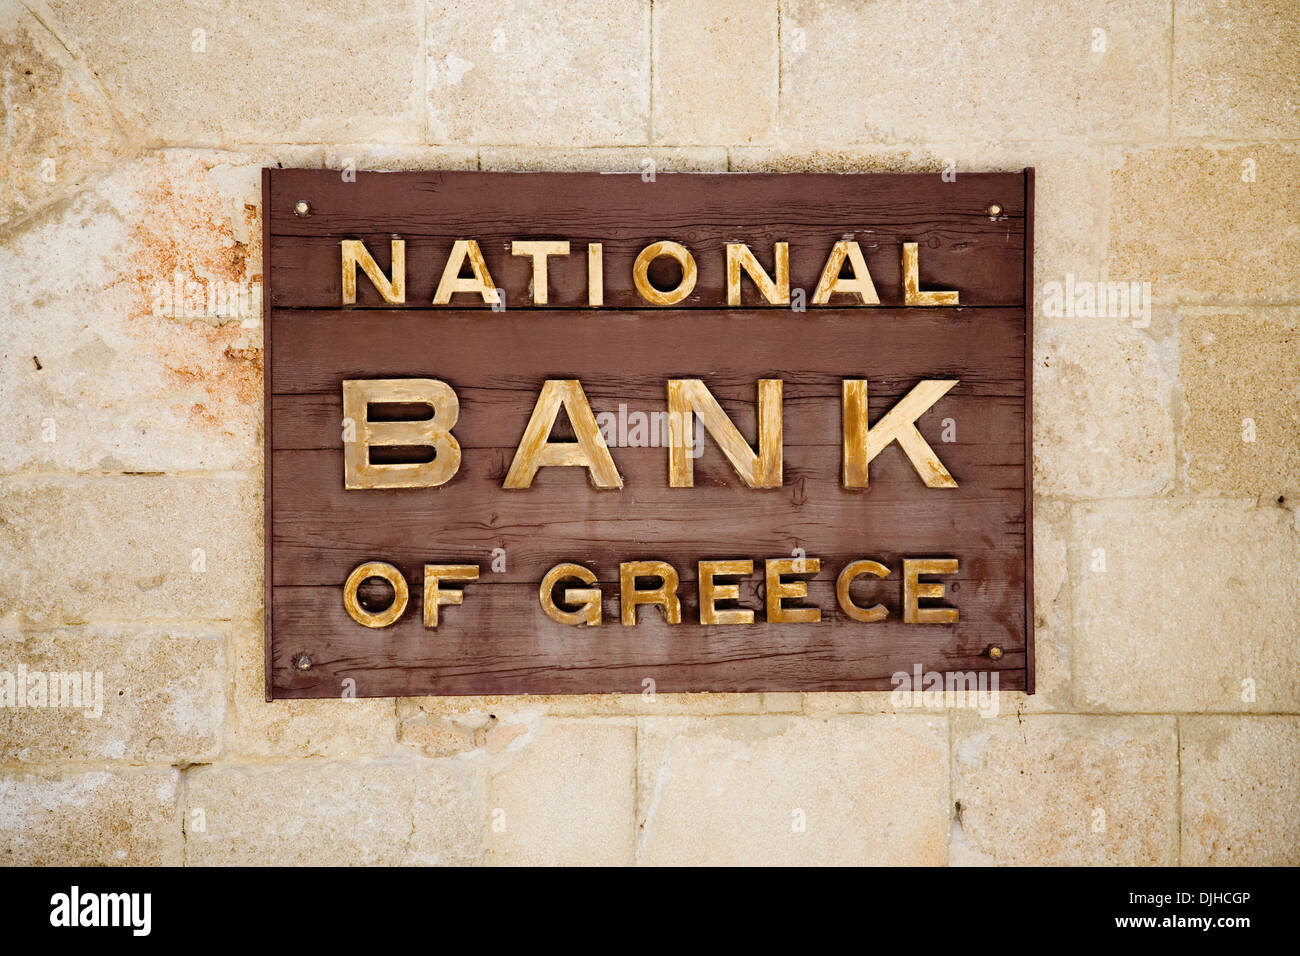 Sign of the national bank of greece Stock Photo